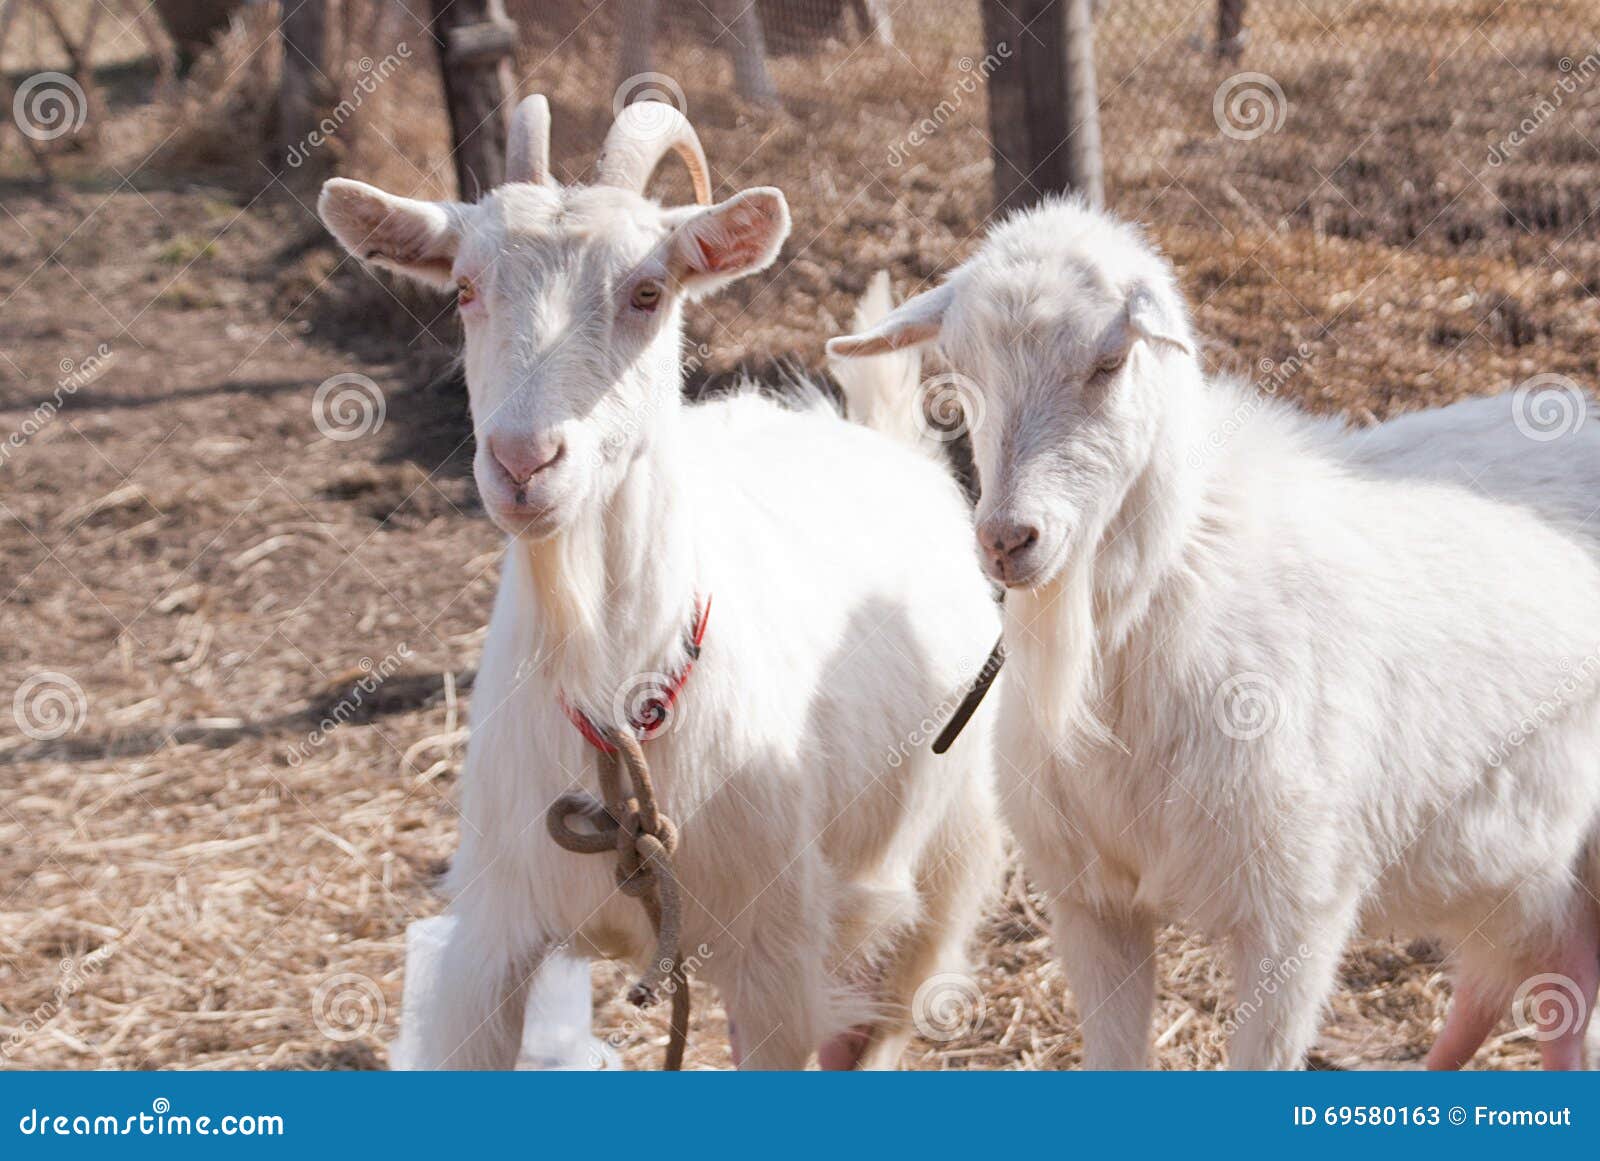 Two old goats stock image. Image of pair, nature, together - 69580163